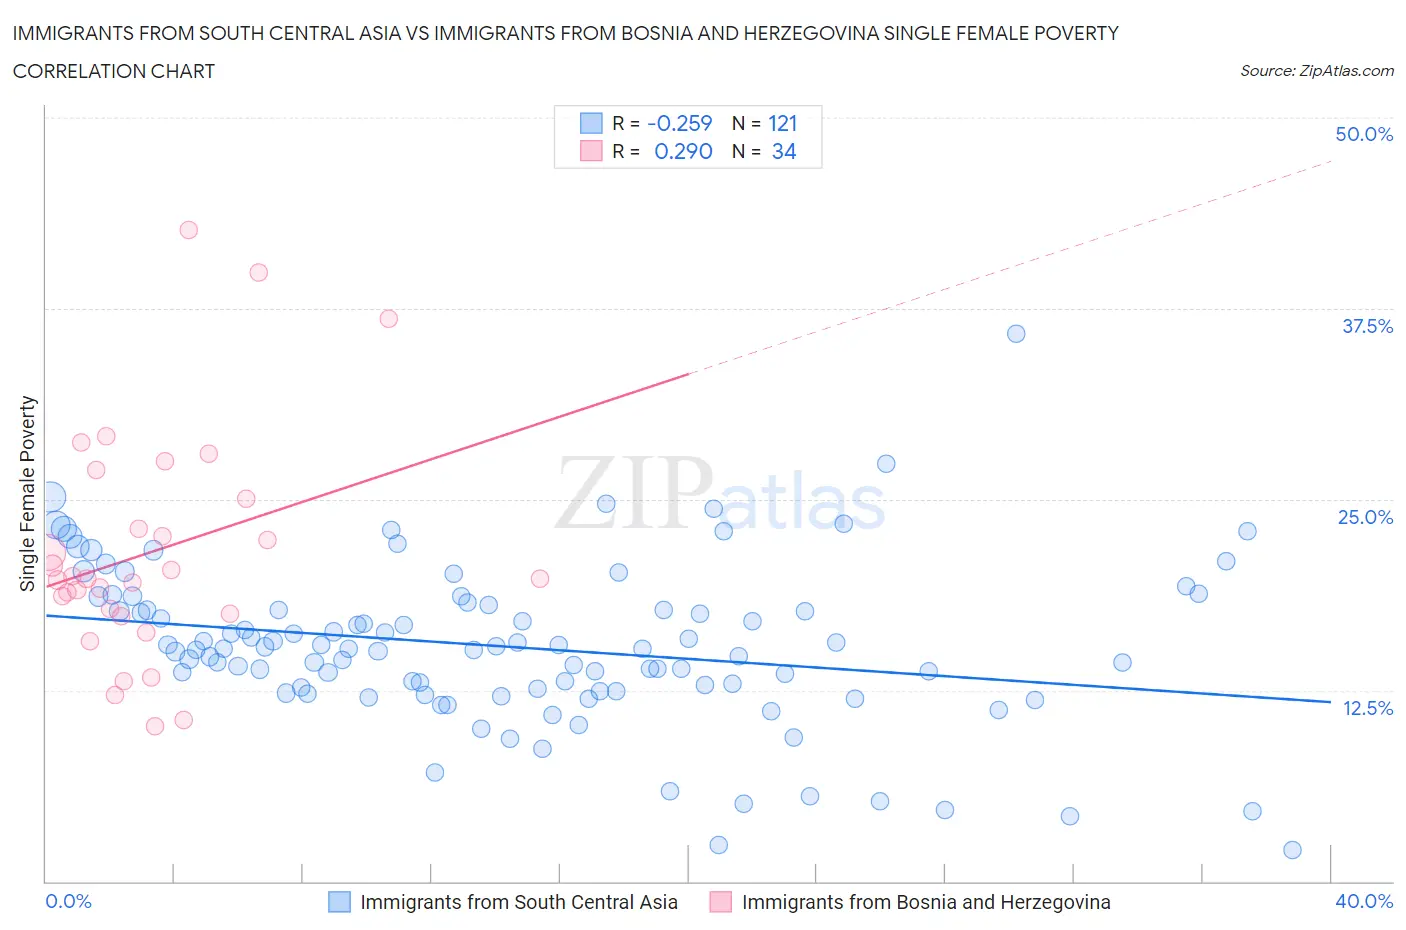 Immigrants from South Central Asia vs Immigrants from Bosnia and Herzegovina Single Female Poverty